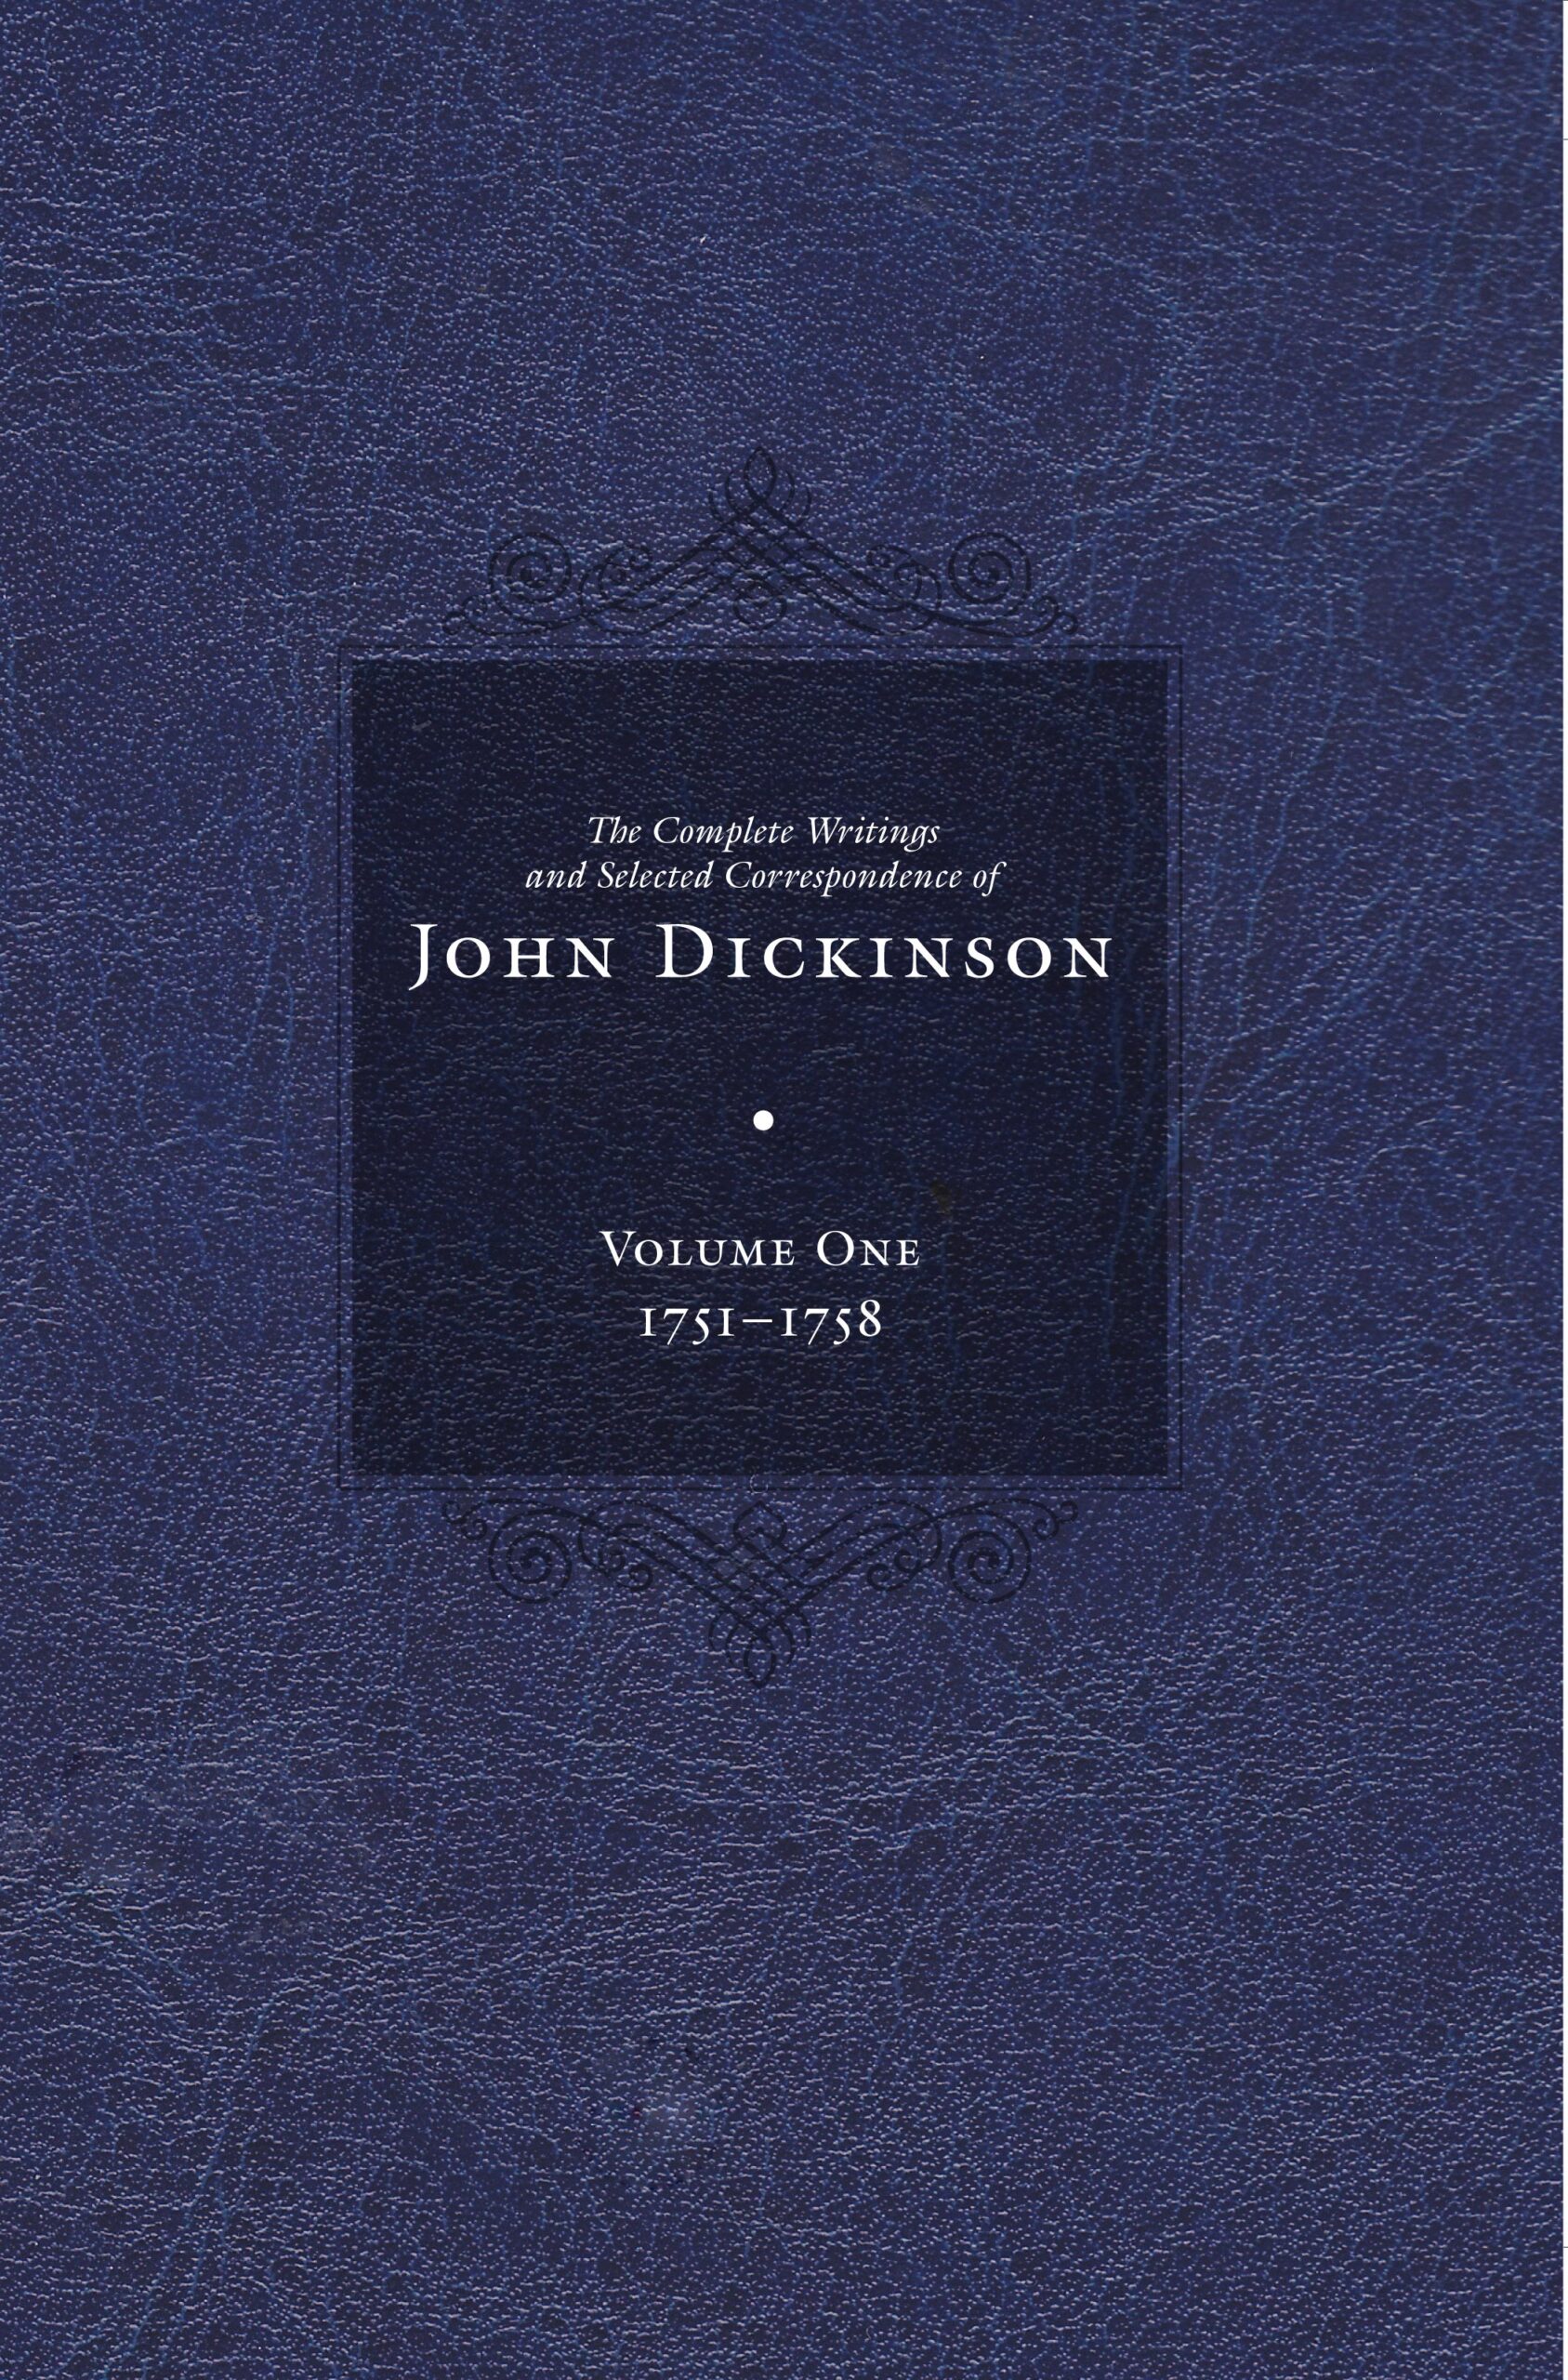 The first volume of <em>The Complete Writings and Selected Correspondence of John Dickinson</em> premieres!